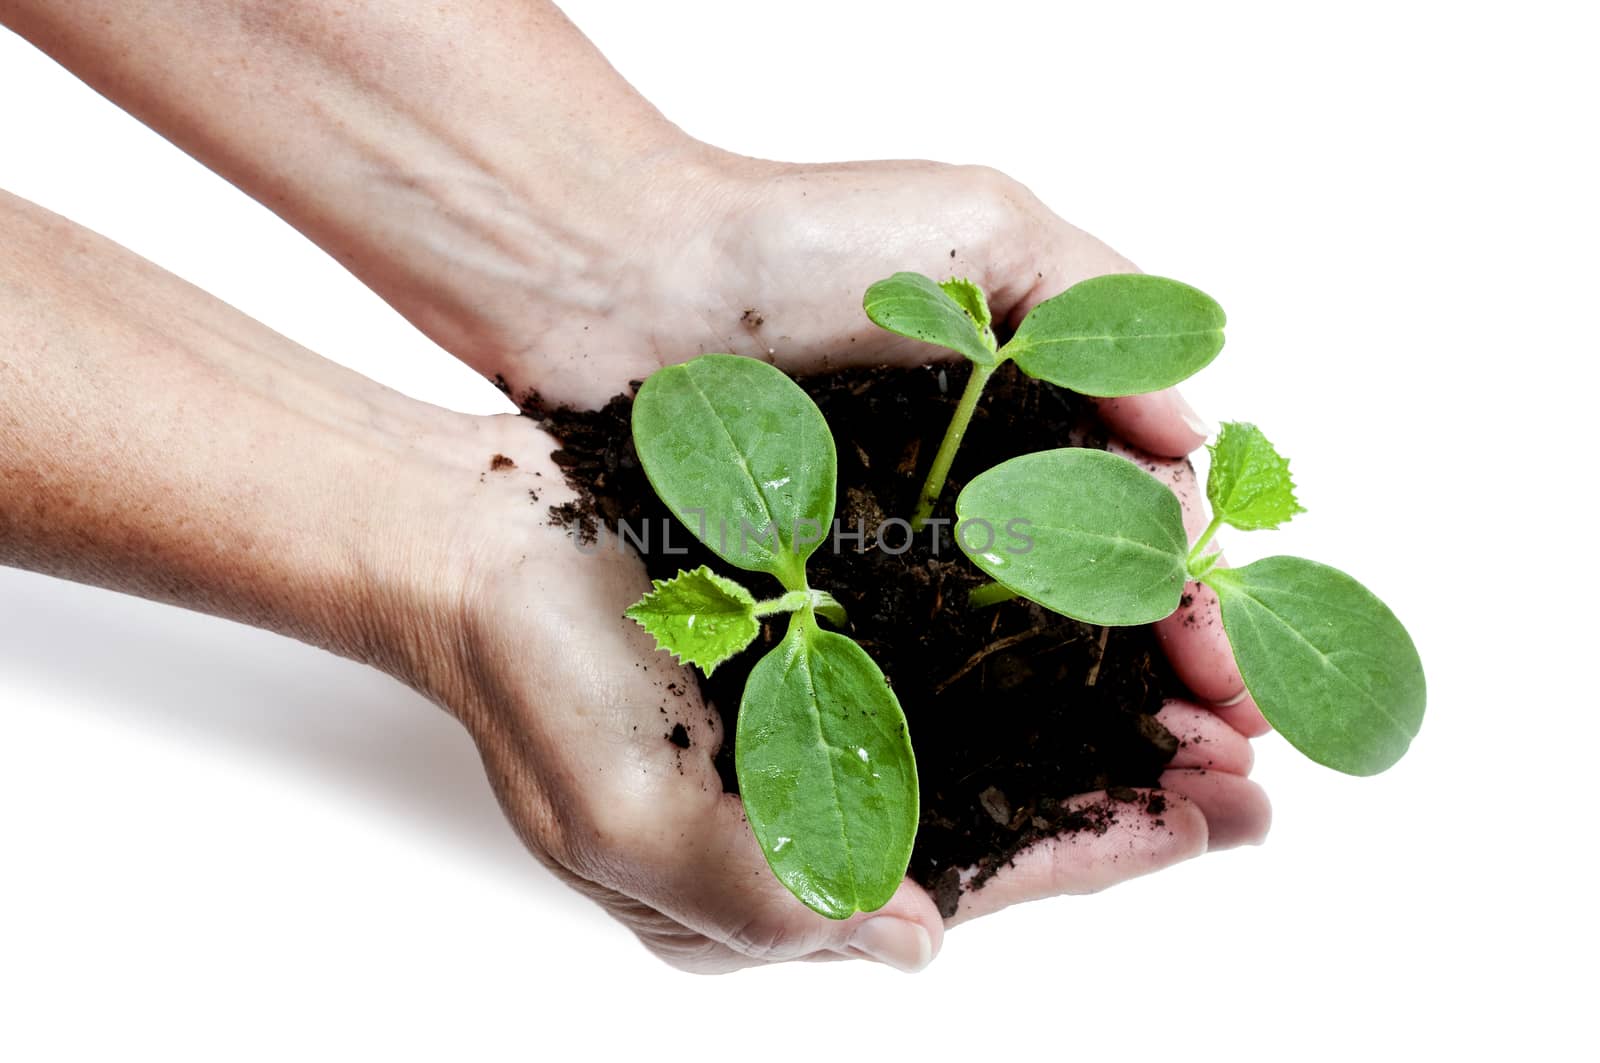 Female hands gently holding three your cantaloupe sprouts.  On white background